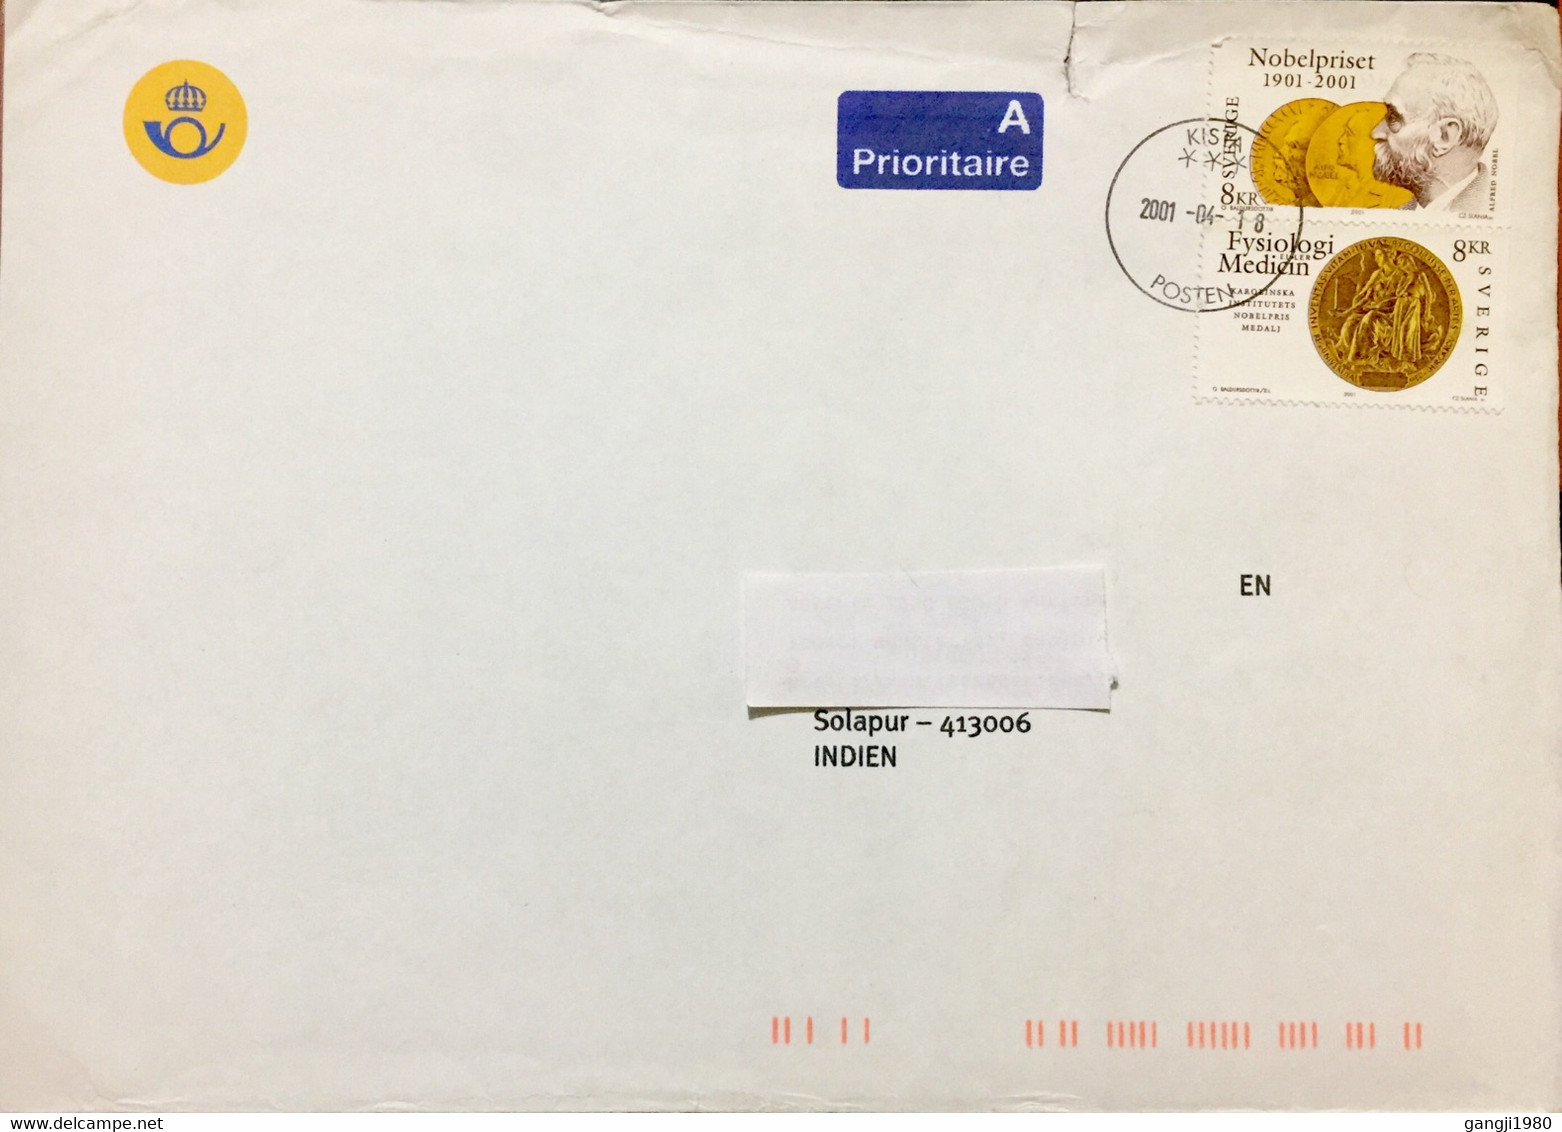 SWEDEN 2001, COVER USED TO INDIA, NOBEL PRIZE & MEDAL, SE TENANT STAMP, KISTA CITY CANCEL,16 KROWN RATE - Lettres & Documents